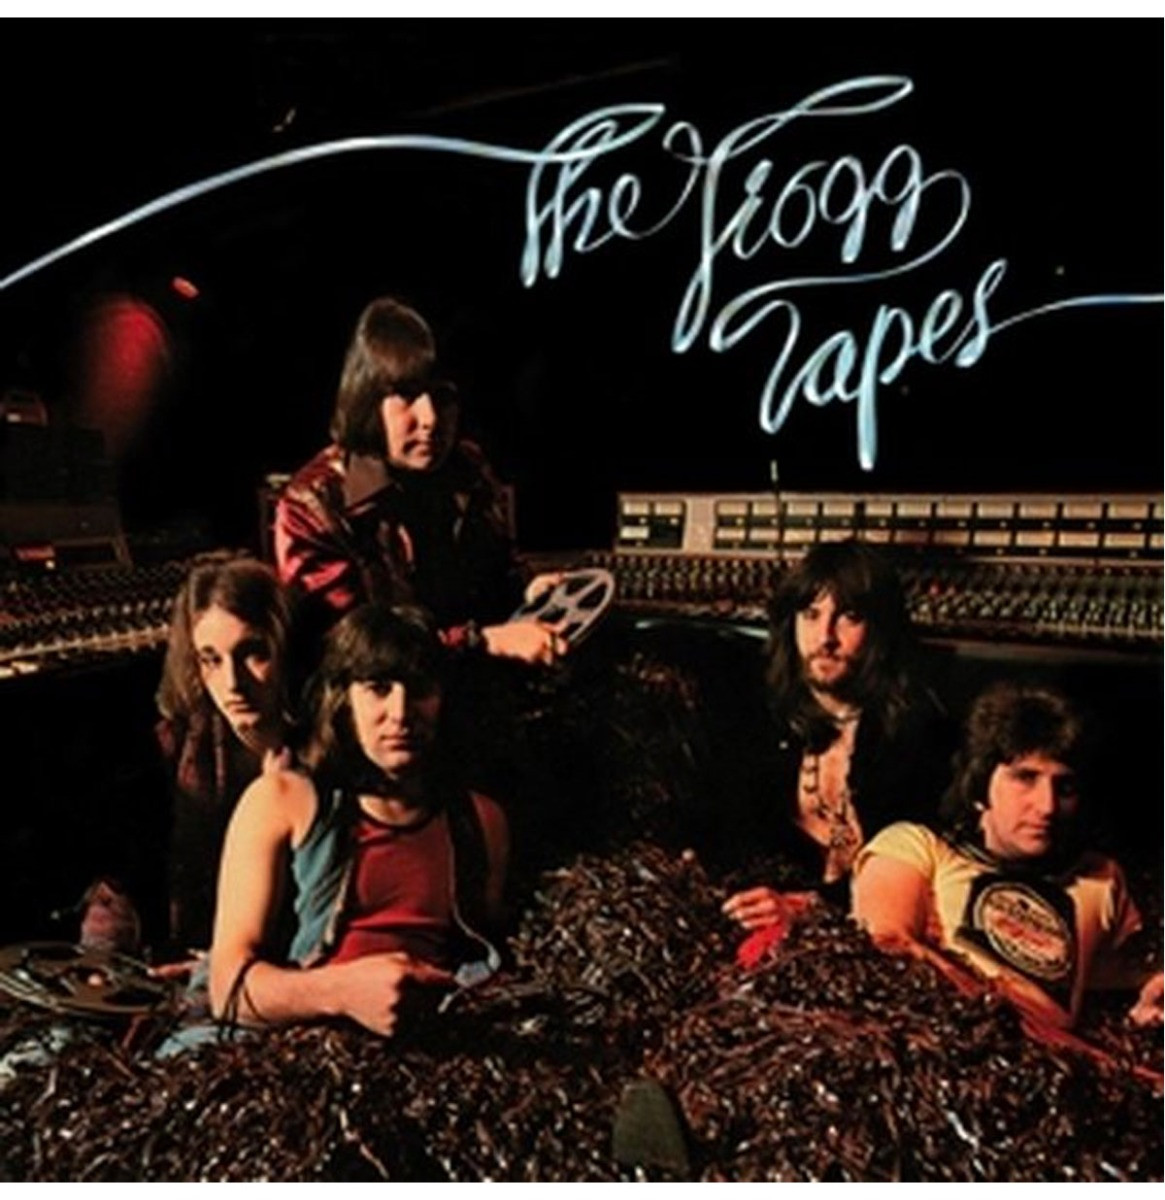 The Troggs - The Trogg Tapes LP